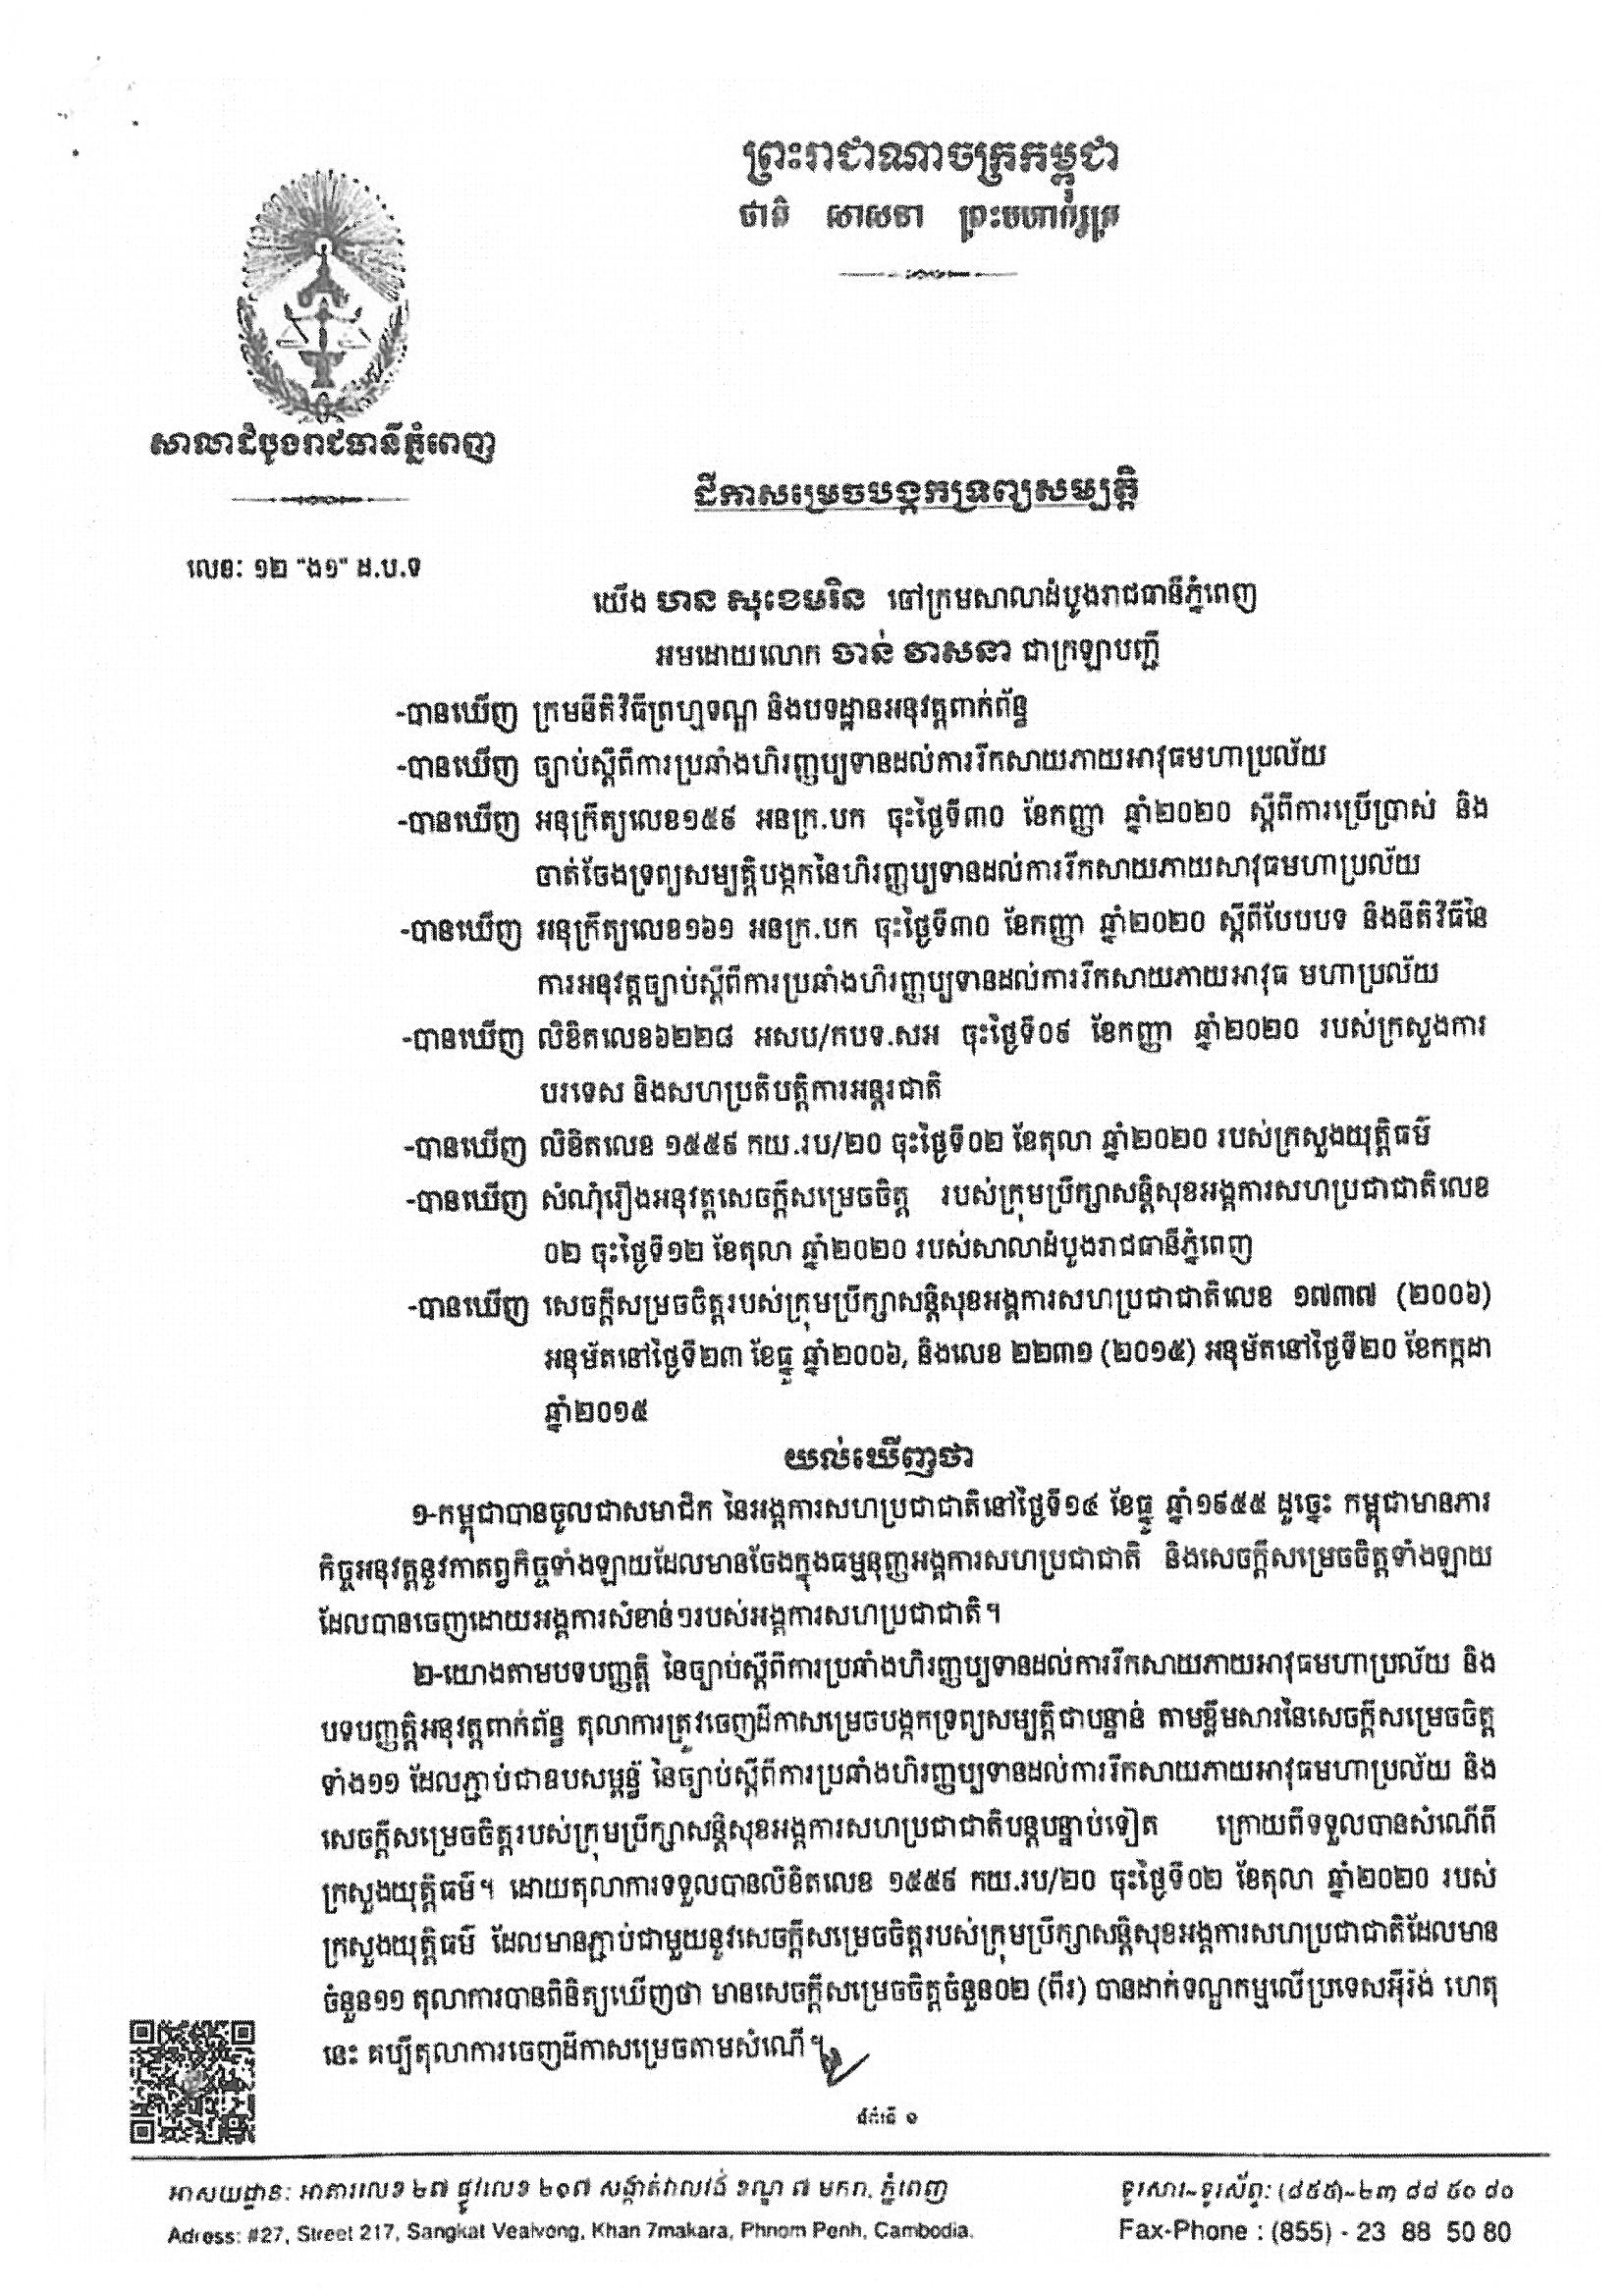 Pages from 1845ក្រសួងយុត្តិធម៌2 2 Page 1